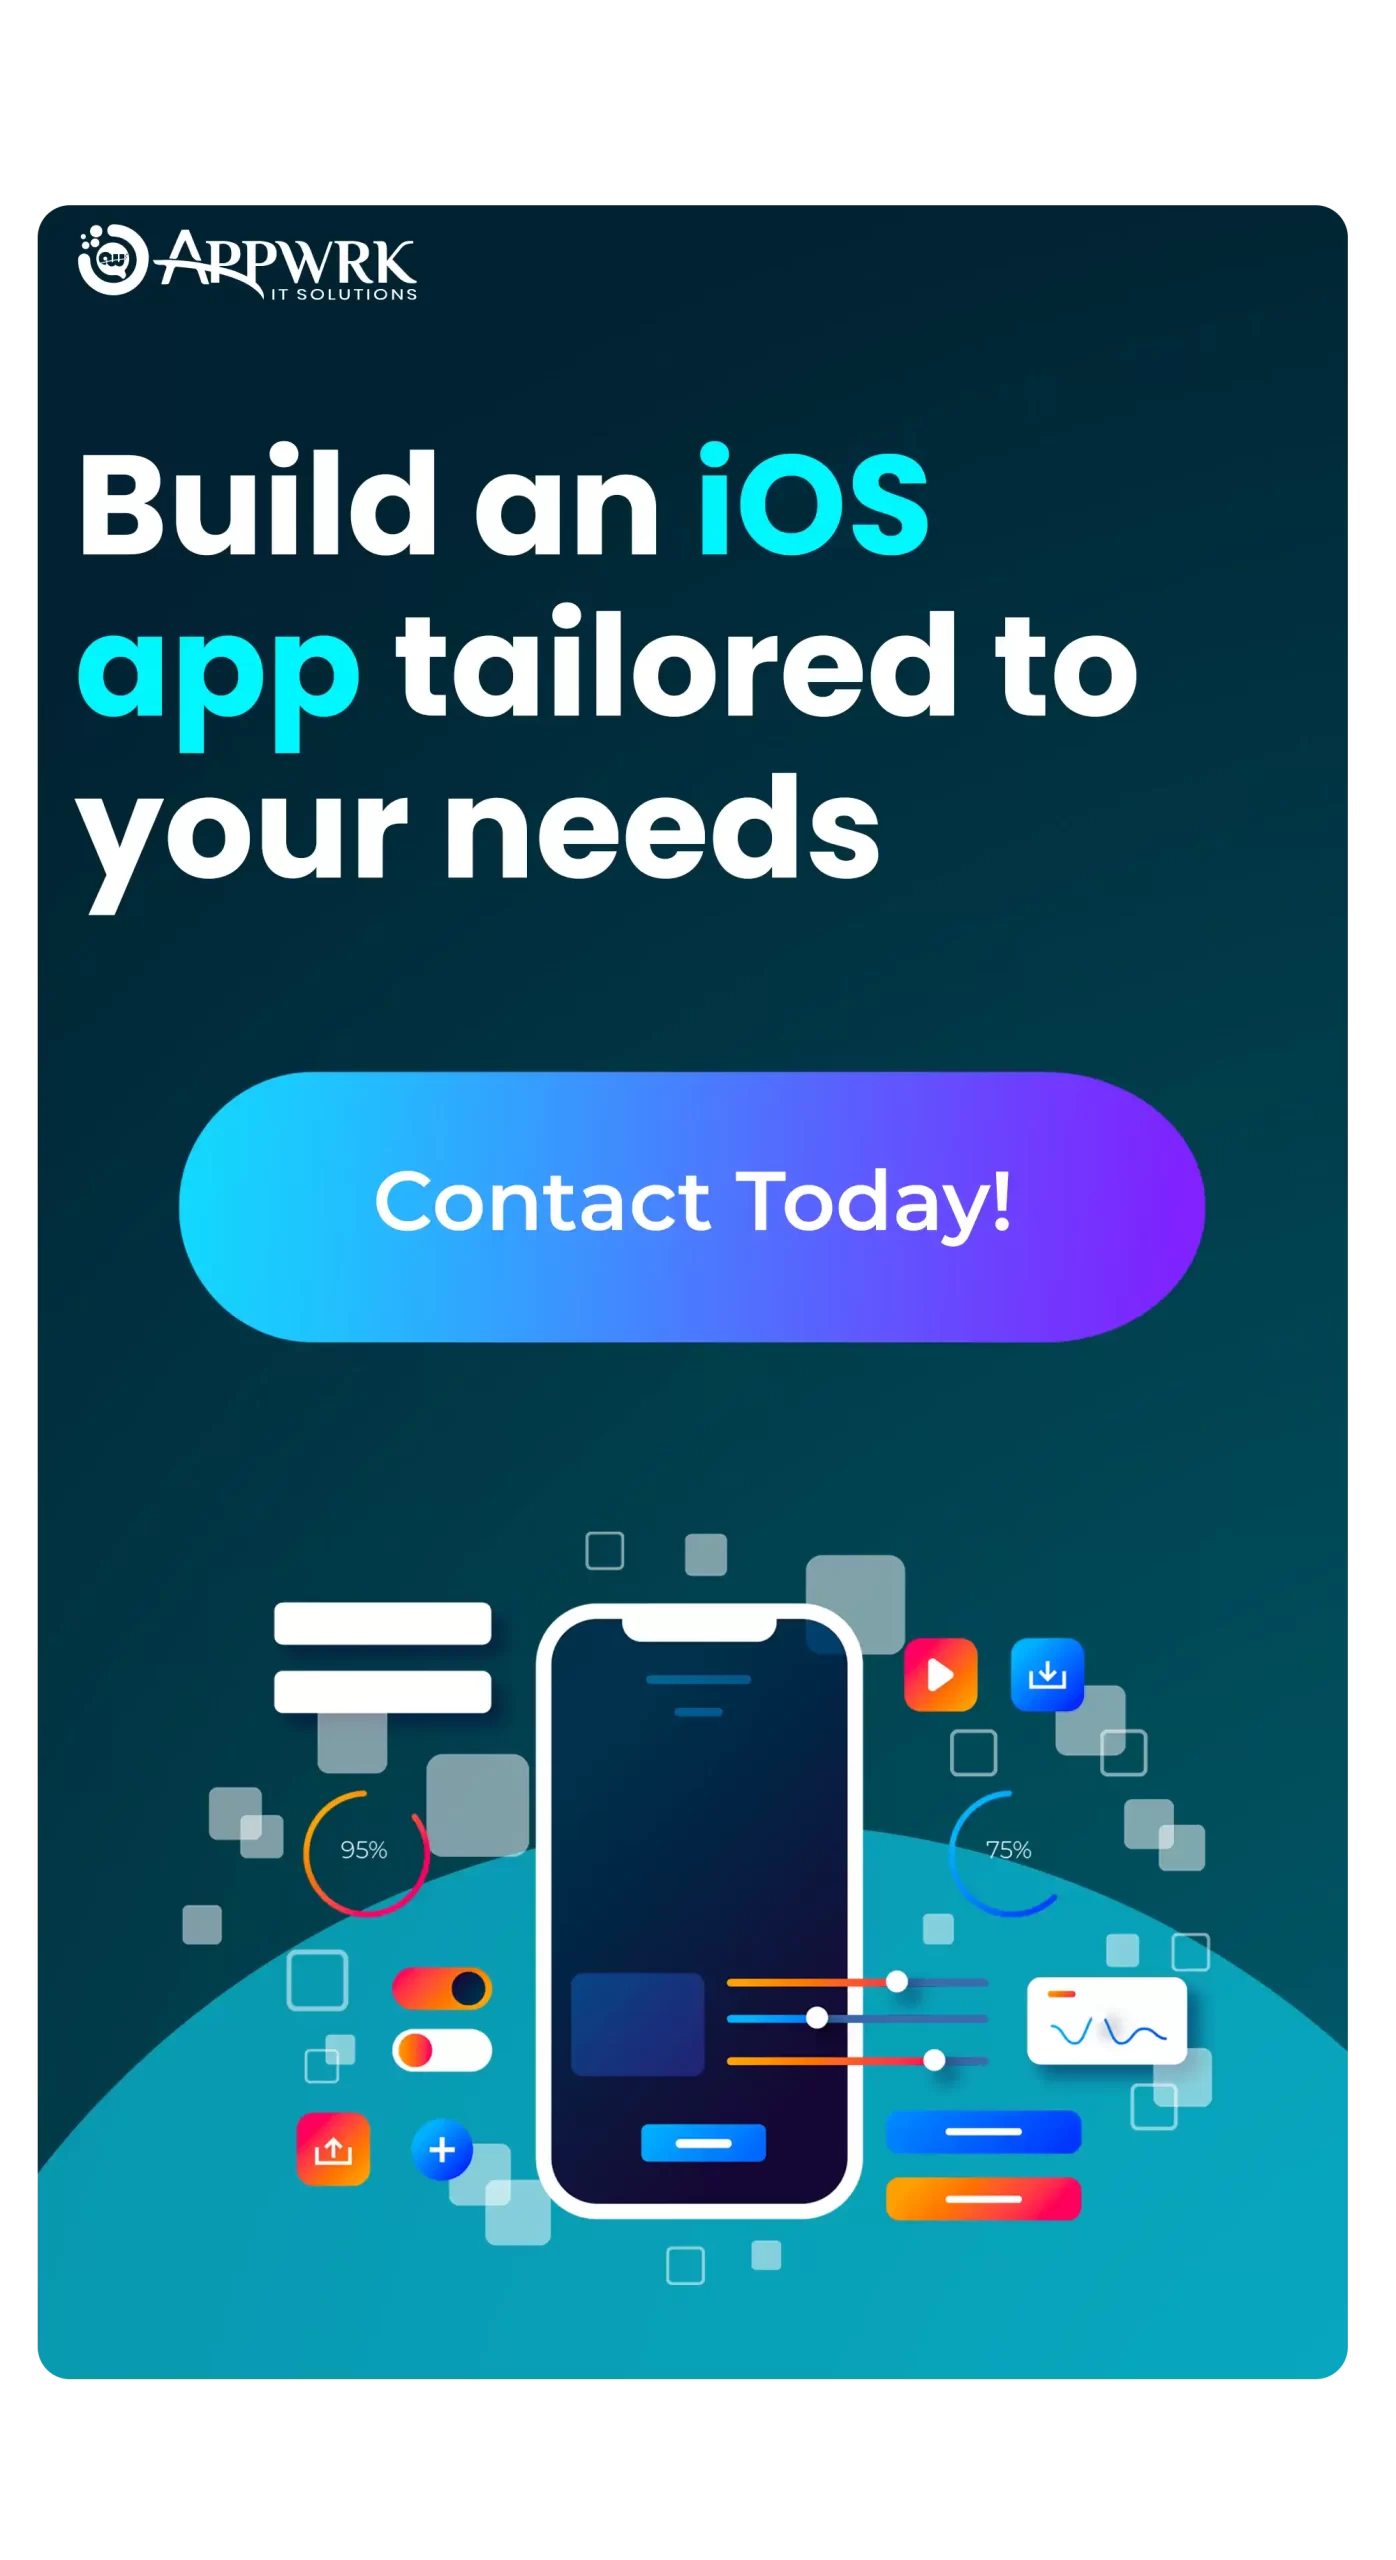 Build an iOS app tailored to your needs